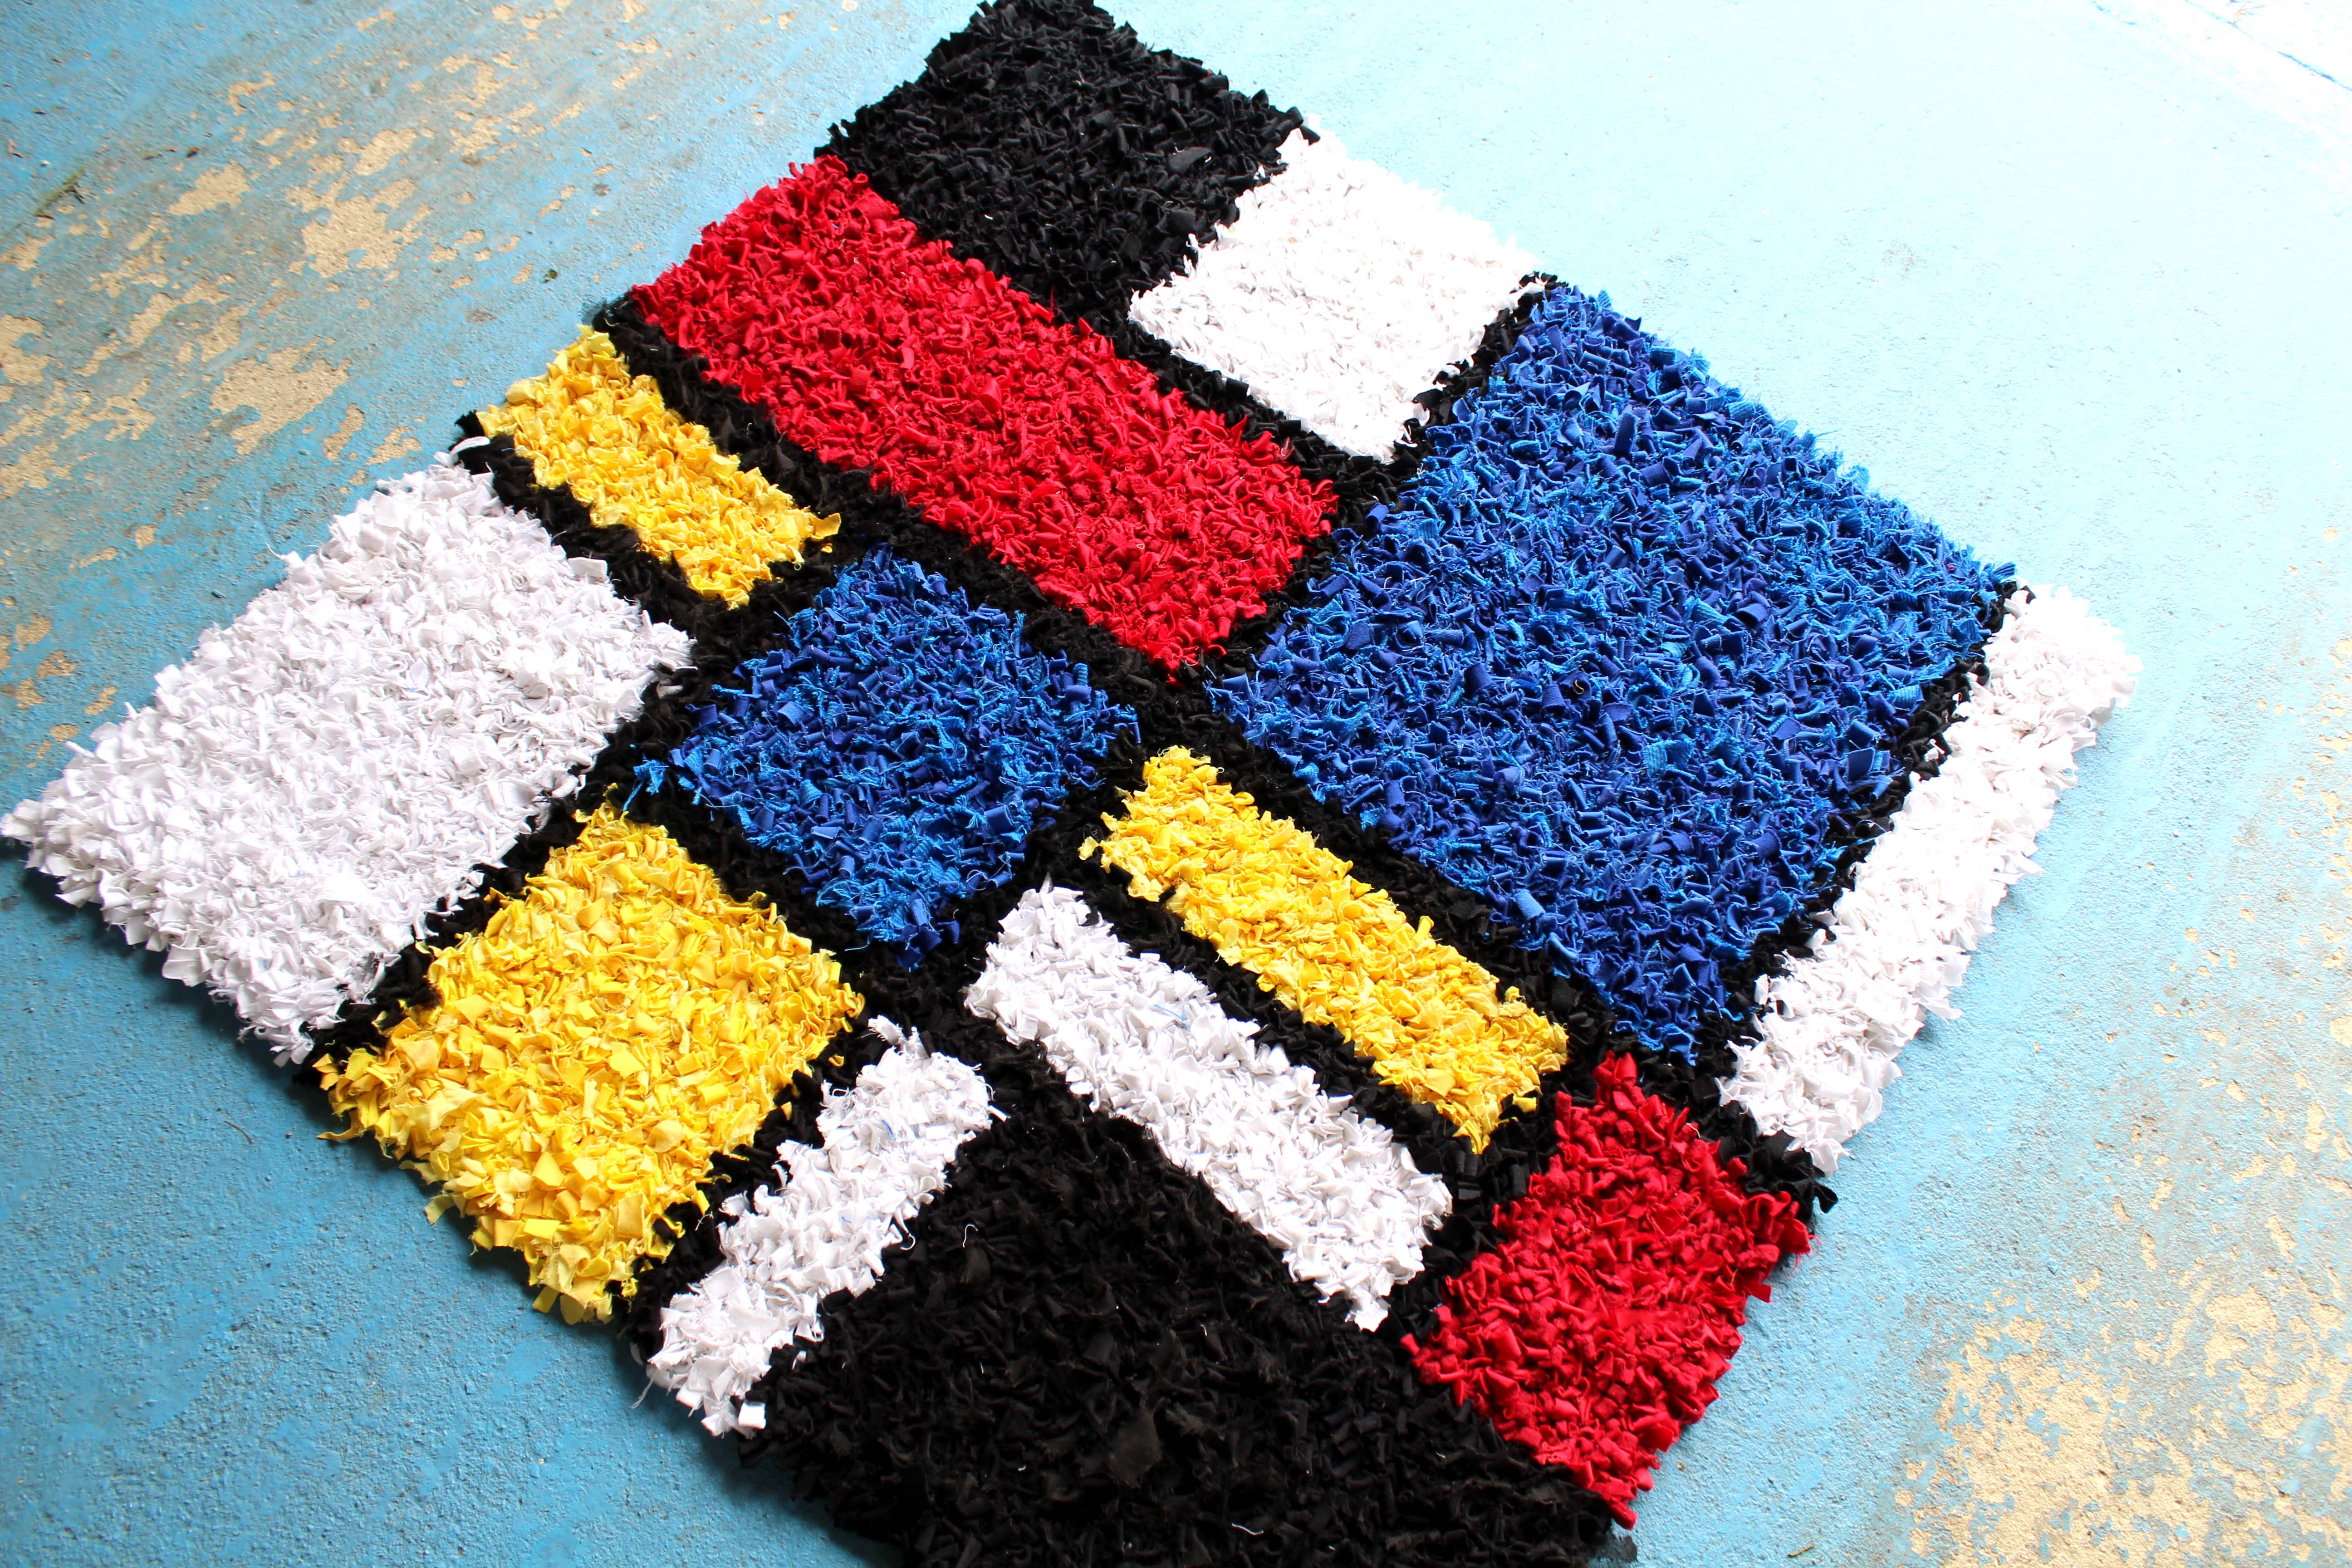 Rustic traditional British rag rug made using recycled materials that would otherwise go to landfill.